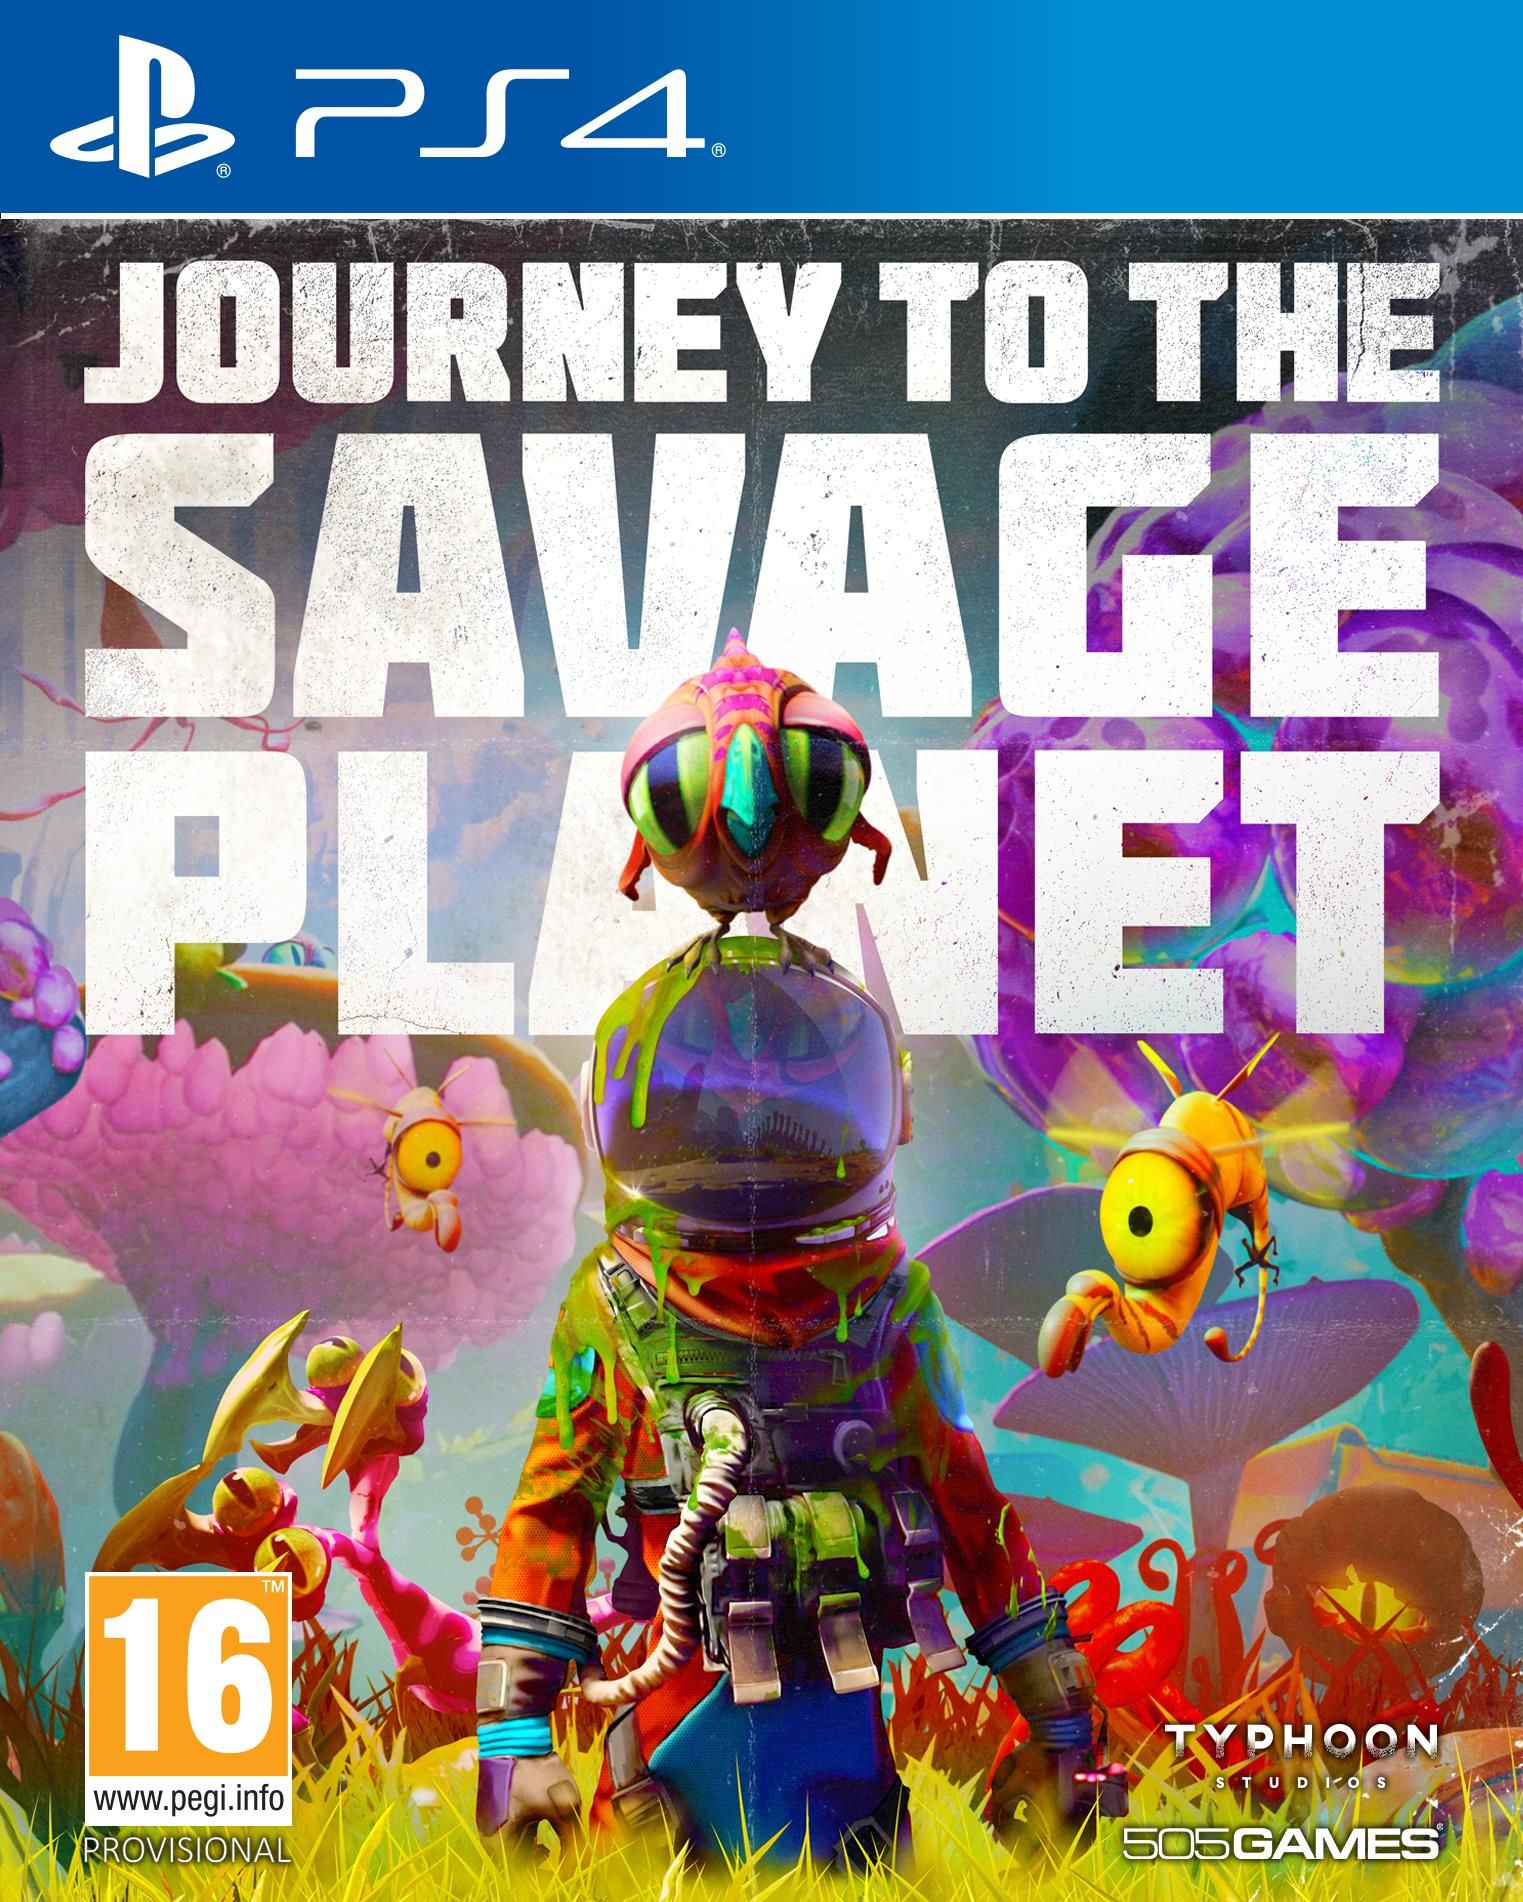 Journey to a savage planet